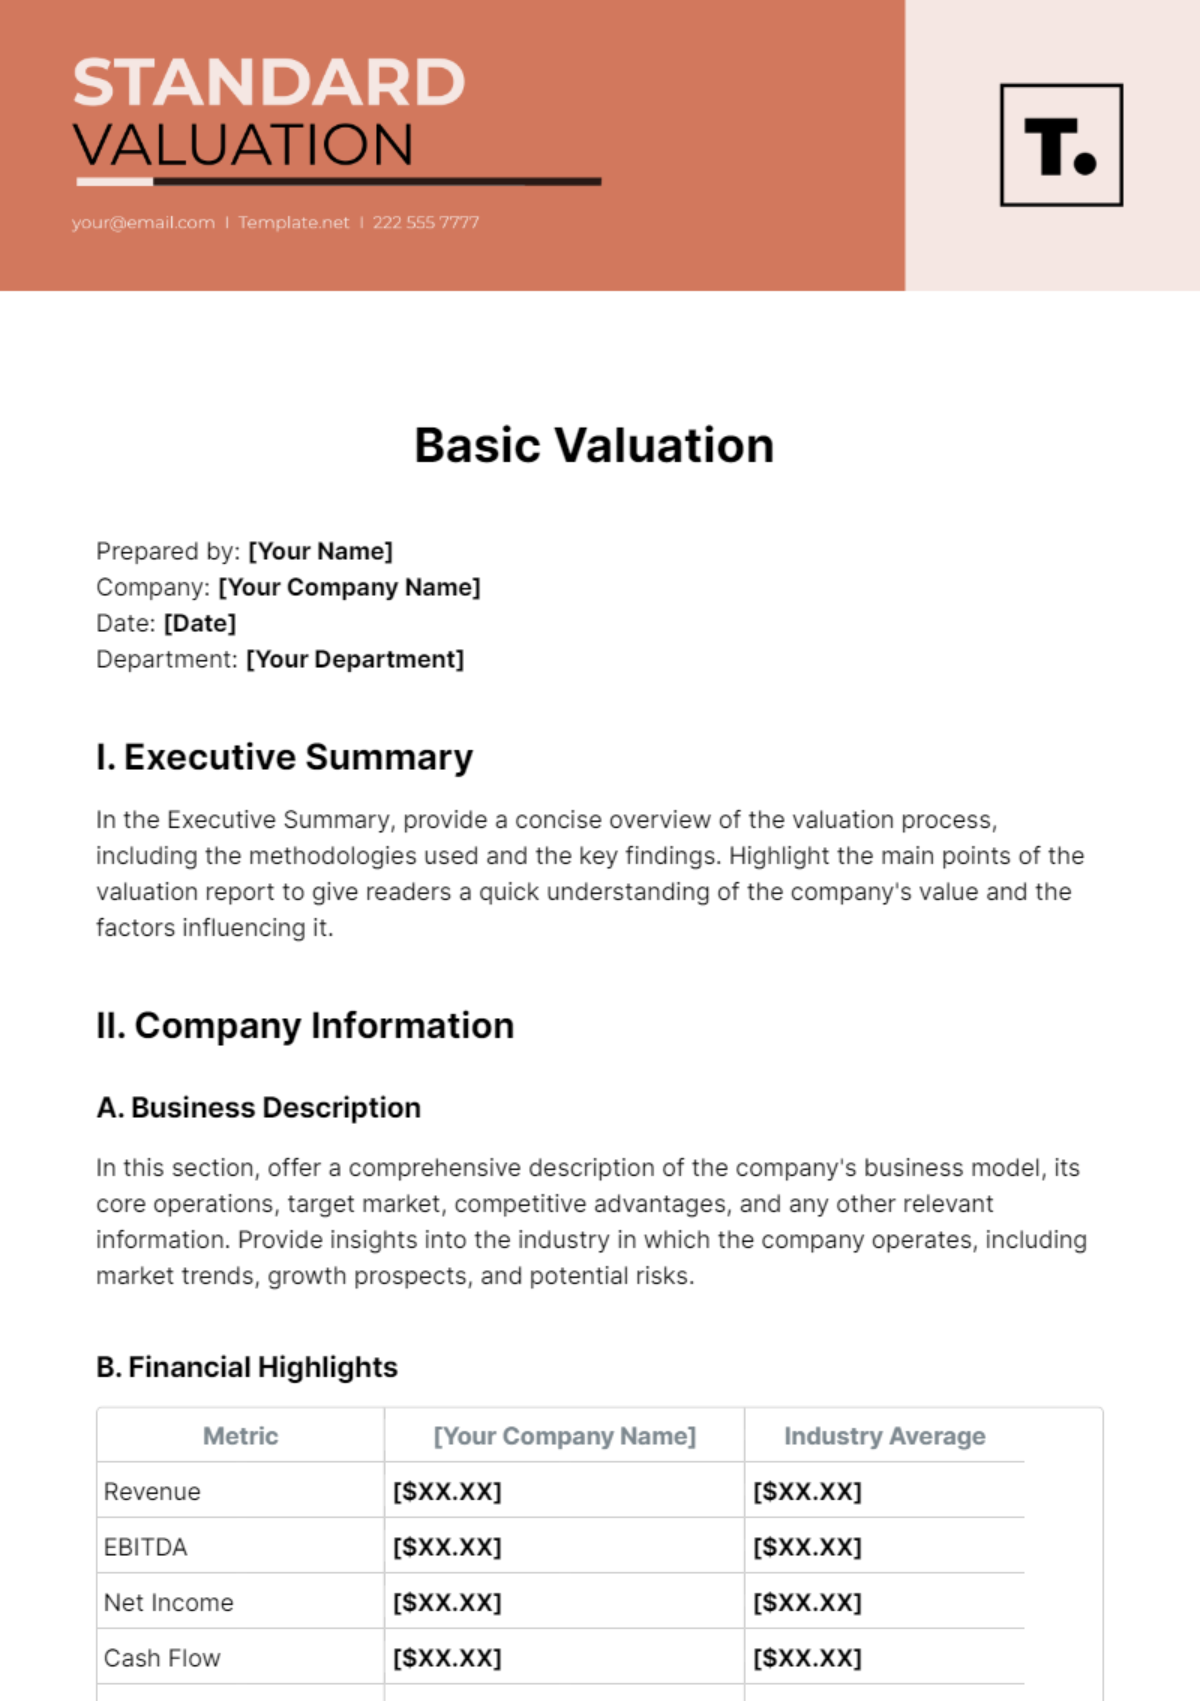 Basic Valuation Template